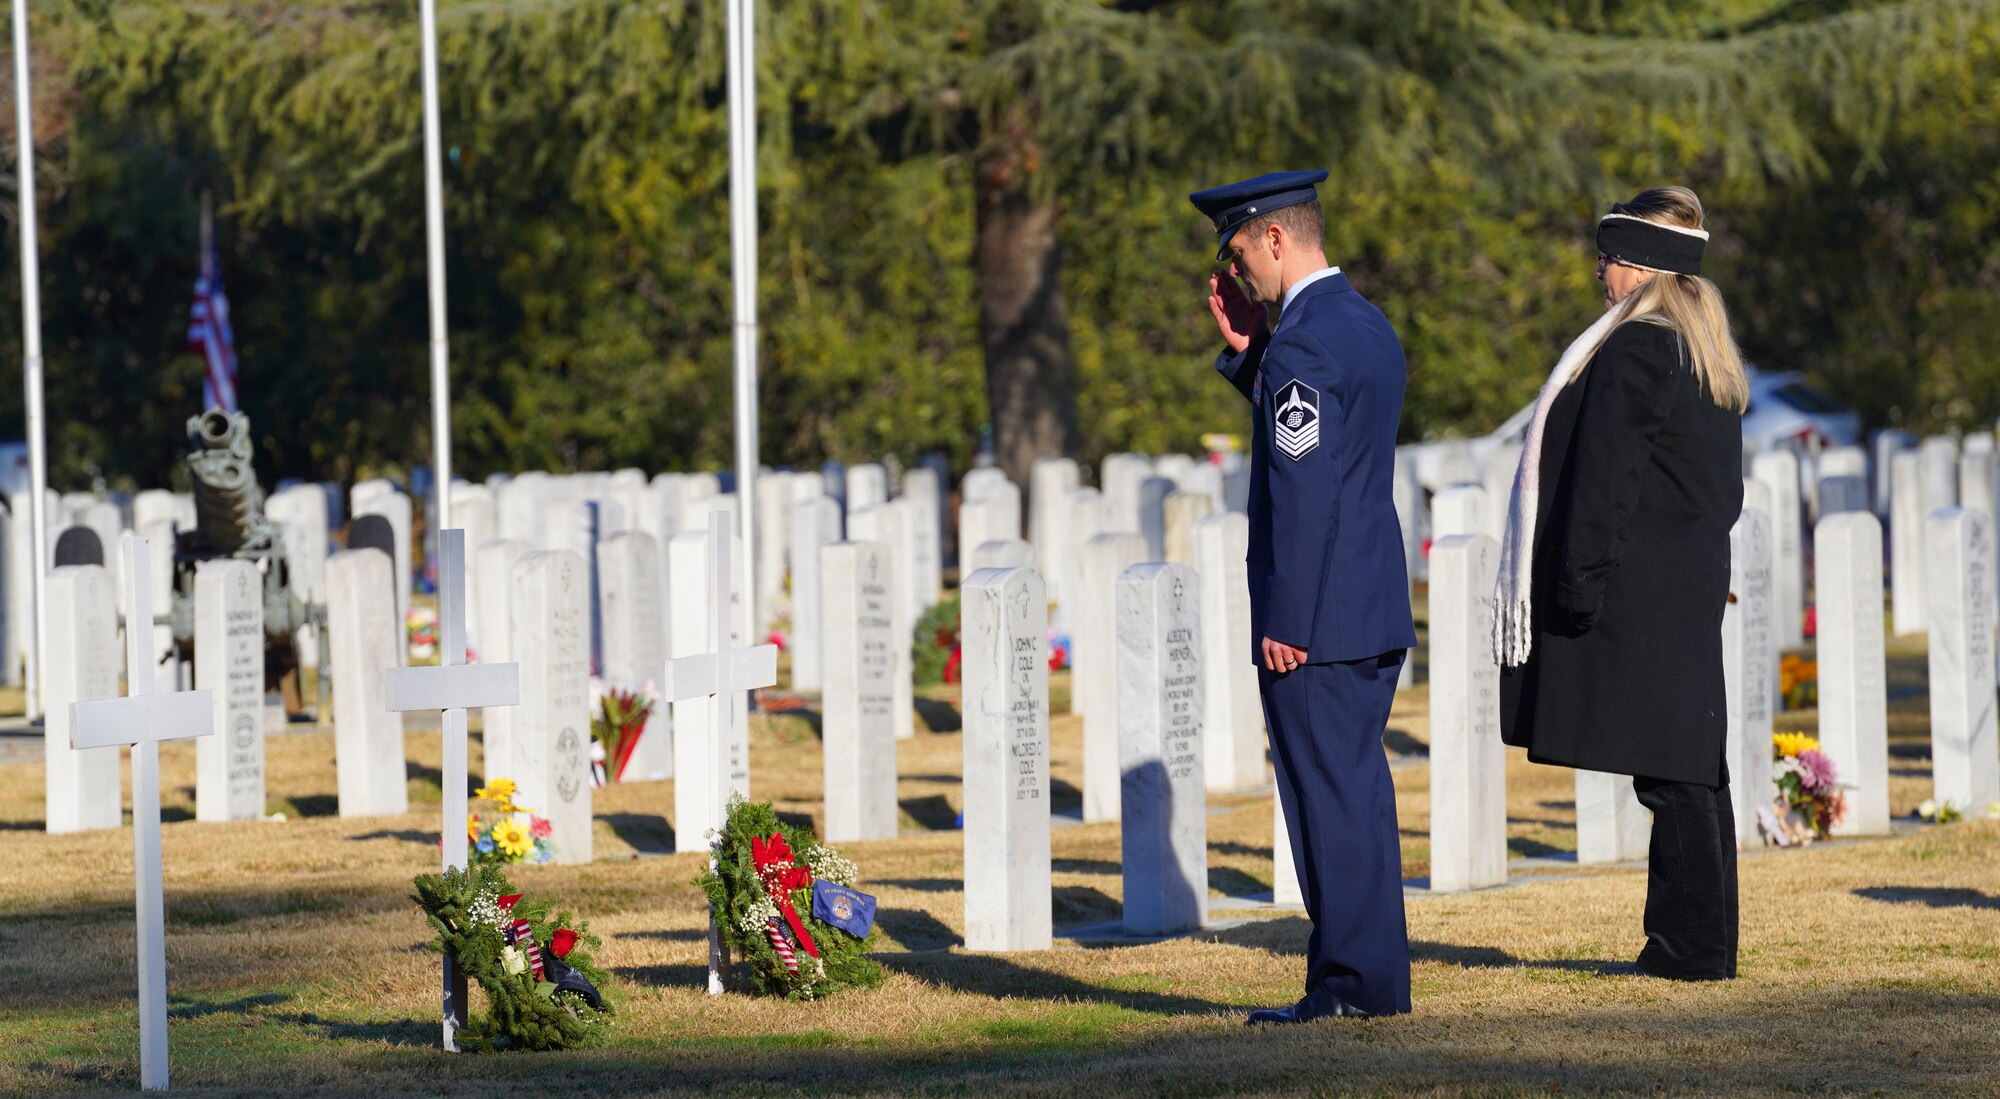 U.S. Space Force Master Sgt. Jonathan Wander, 7th Space Warning Squadron senior enlisted leader, and Tammy Pack, retired Navy, lay down wreaths for the Space Force and Merchant Marines, Dec. 17, 2022, at the Sutter Cemetery, Sutter, Calif.